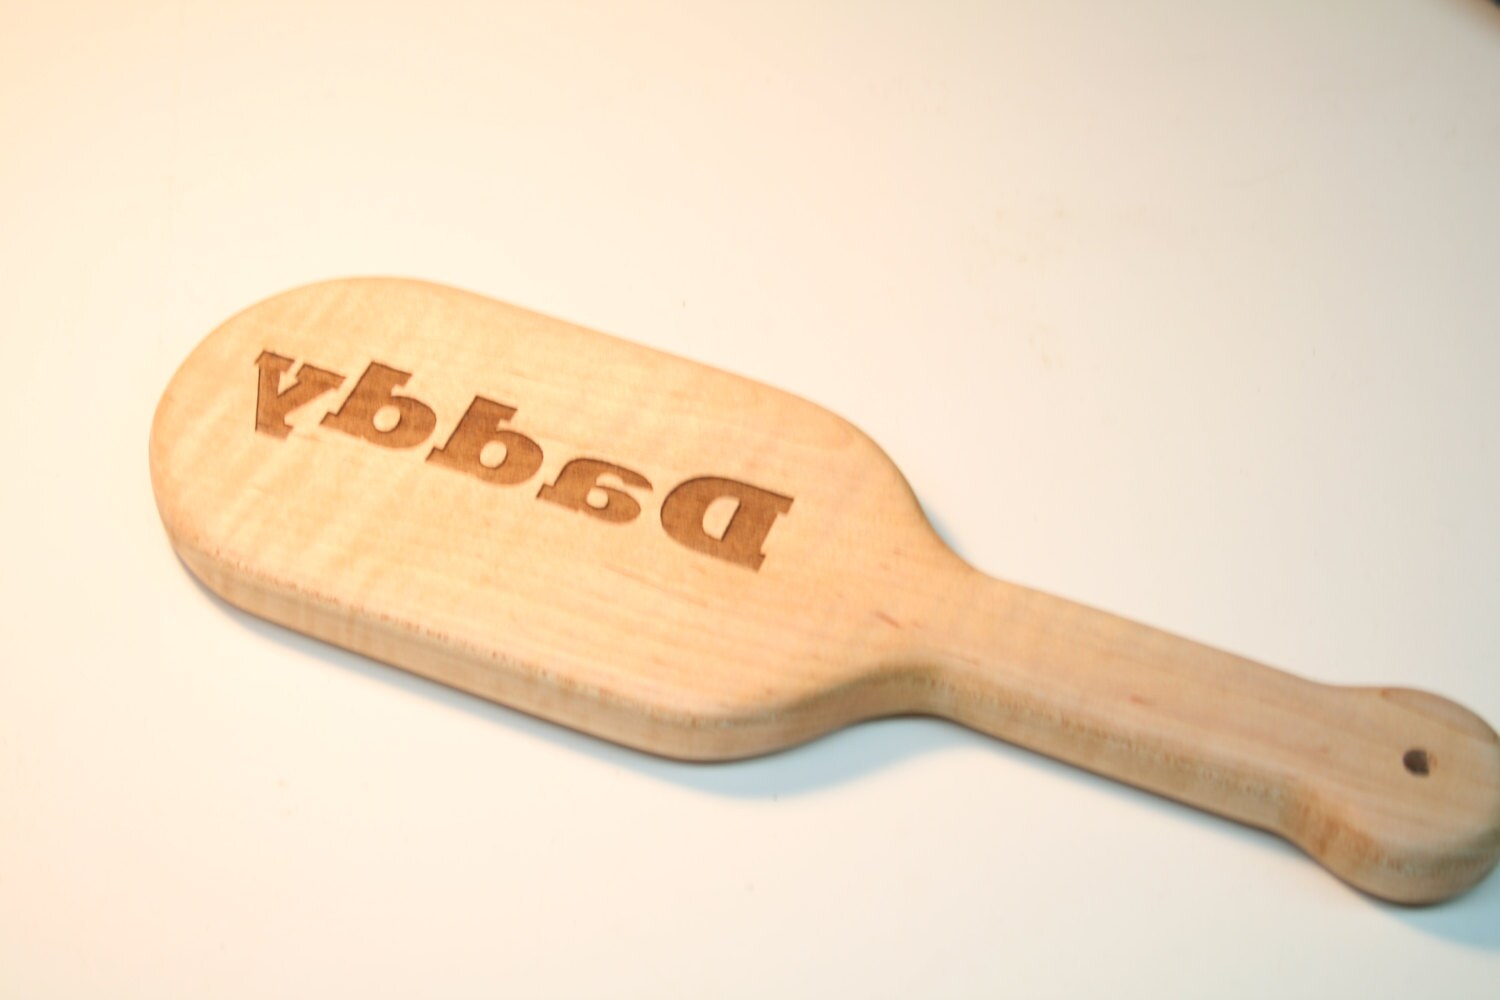 Daddy Laser Engraved Bdsm Spanking Paddle In Maple Mature